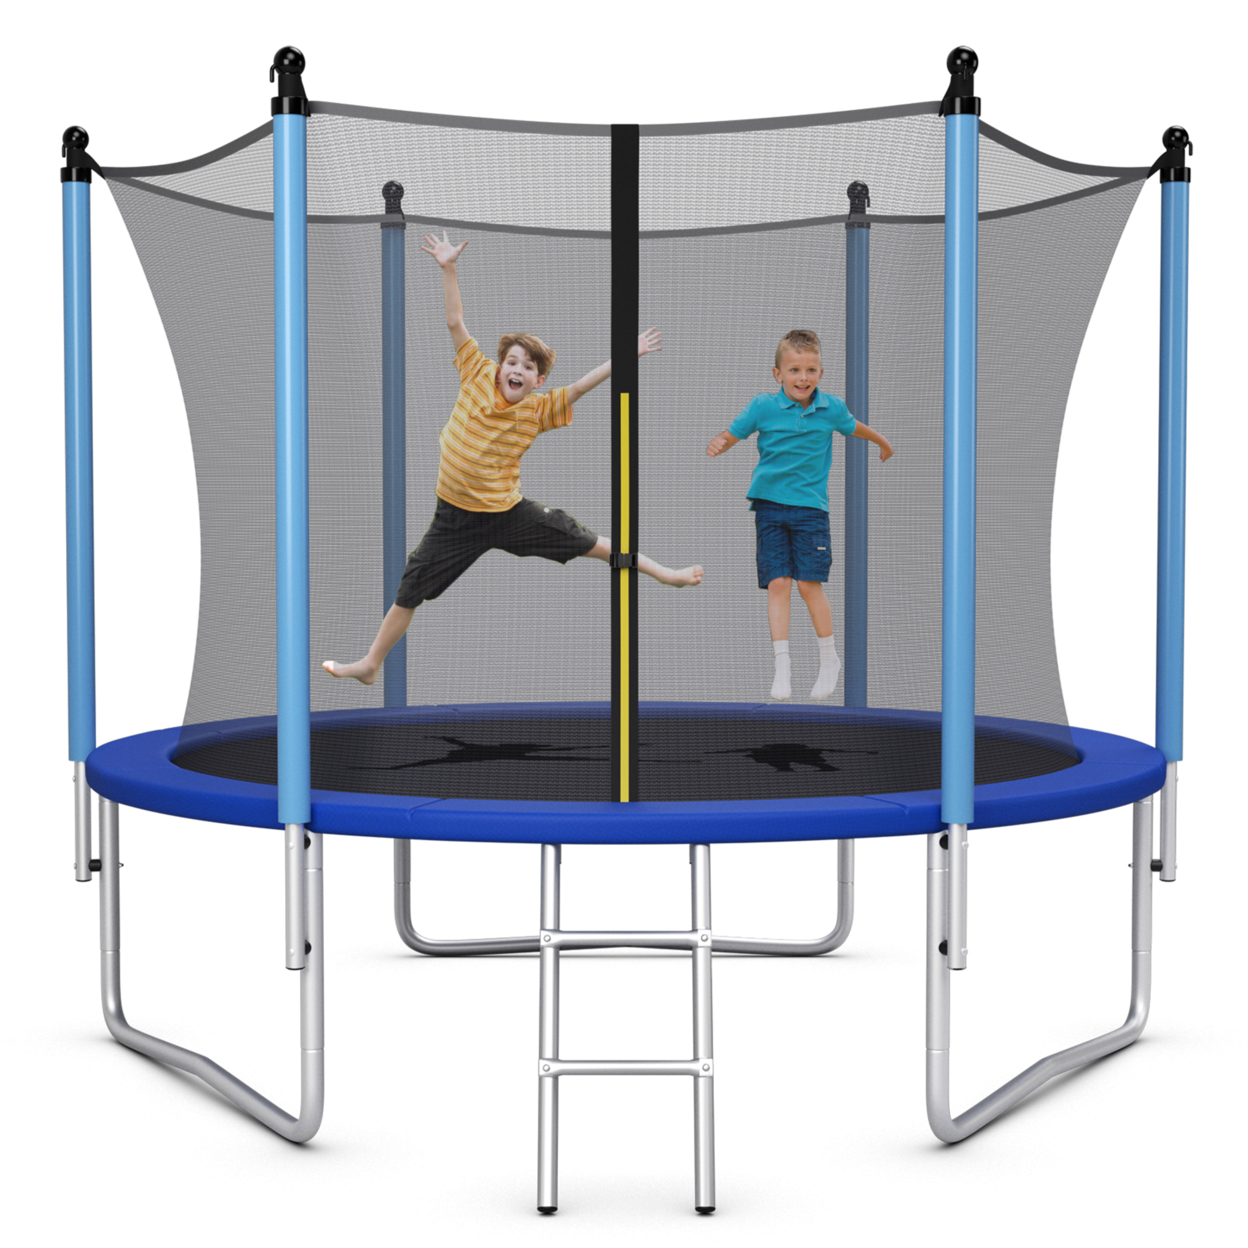 8/10/12/14/15/16FT Jumping Exercise Recreational Bounce Trampoline For Kids W/Safety Enclosure - 10 Ft